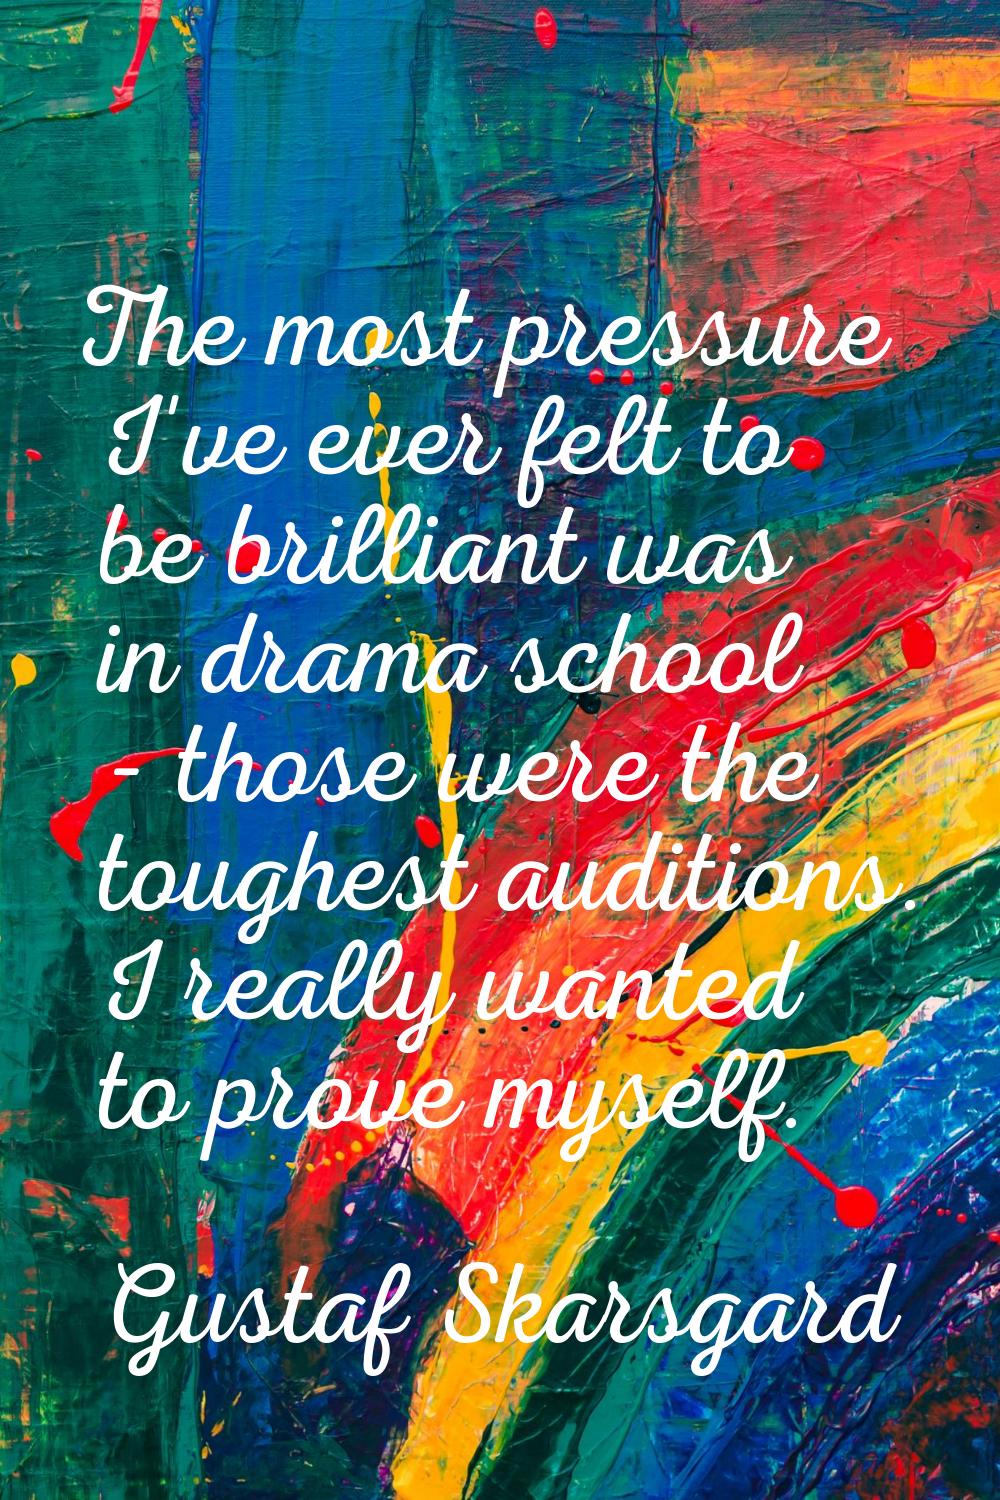 The most pressure I've ever felt to be brilliant was in drama school - those were the toughest audi